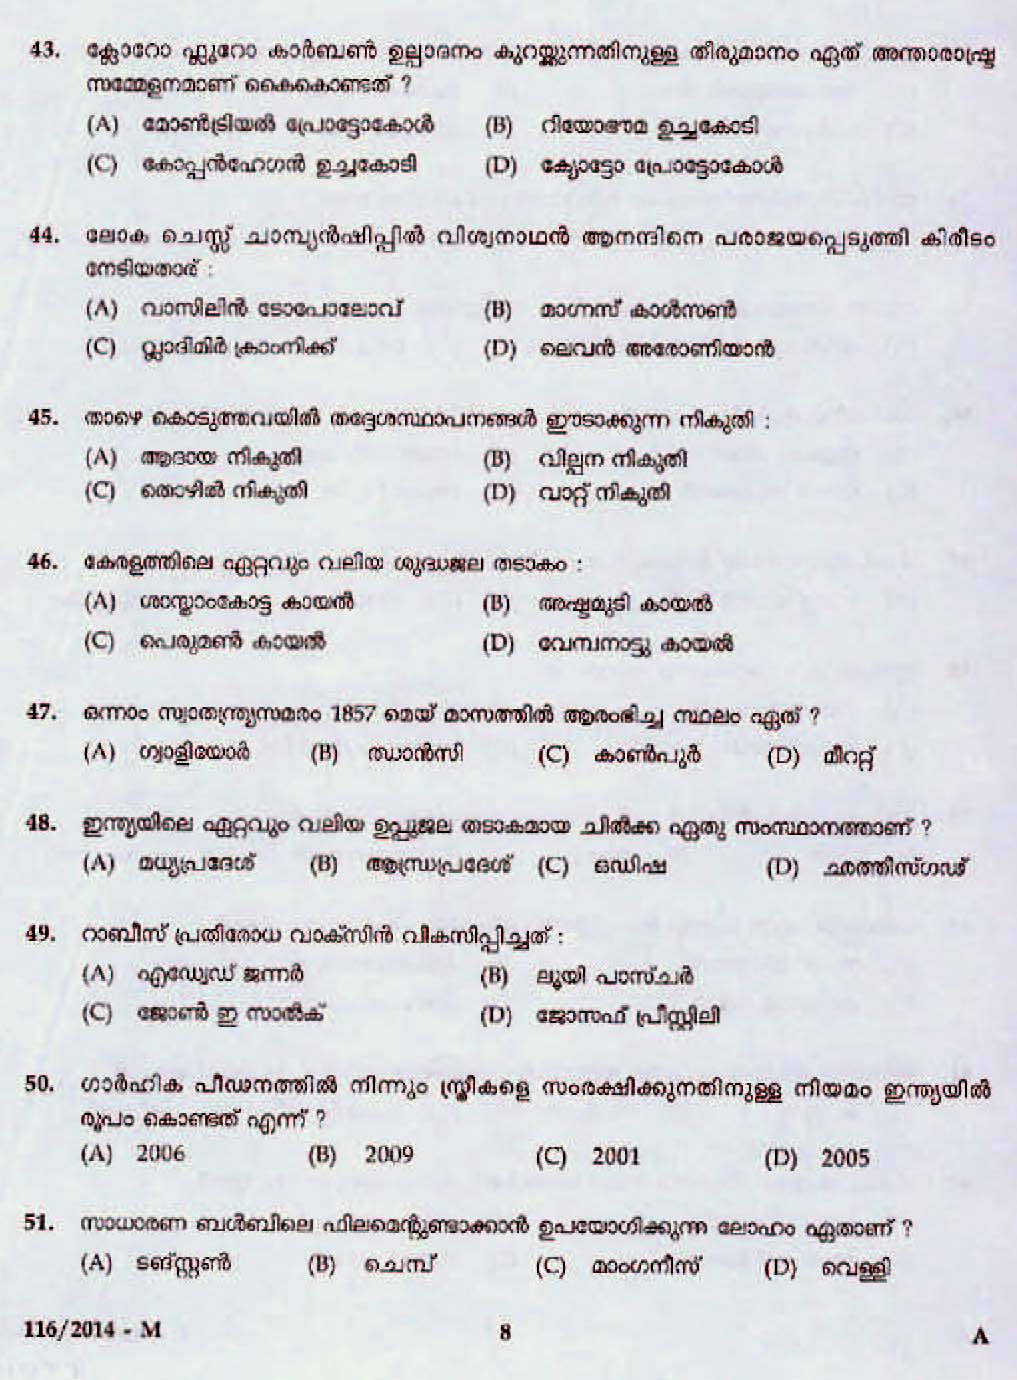 LD Clerk Various All Districts Question Paper Malayalam 2014 Paper Code 1162014 M 6